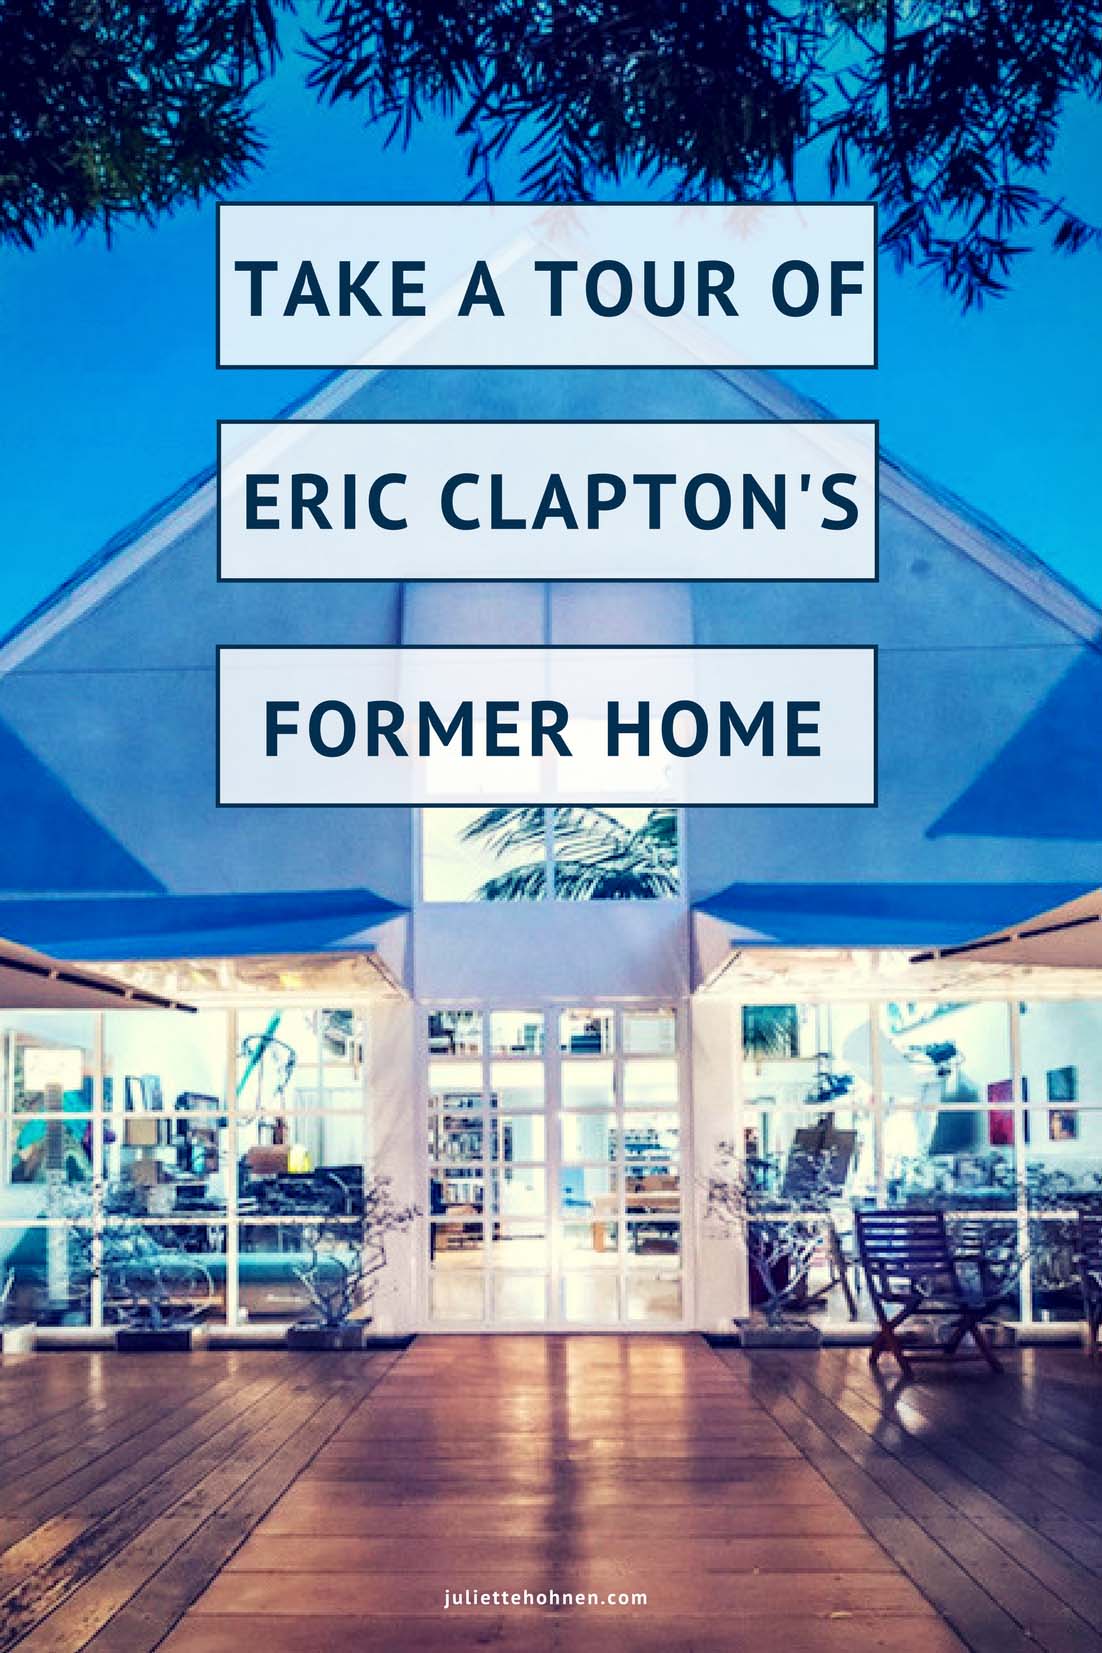 A Tour of Eric Clapton’s Former Home